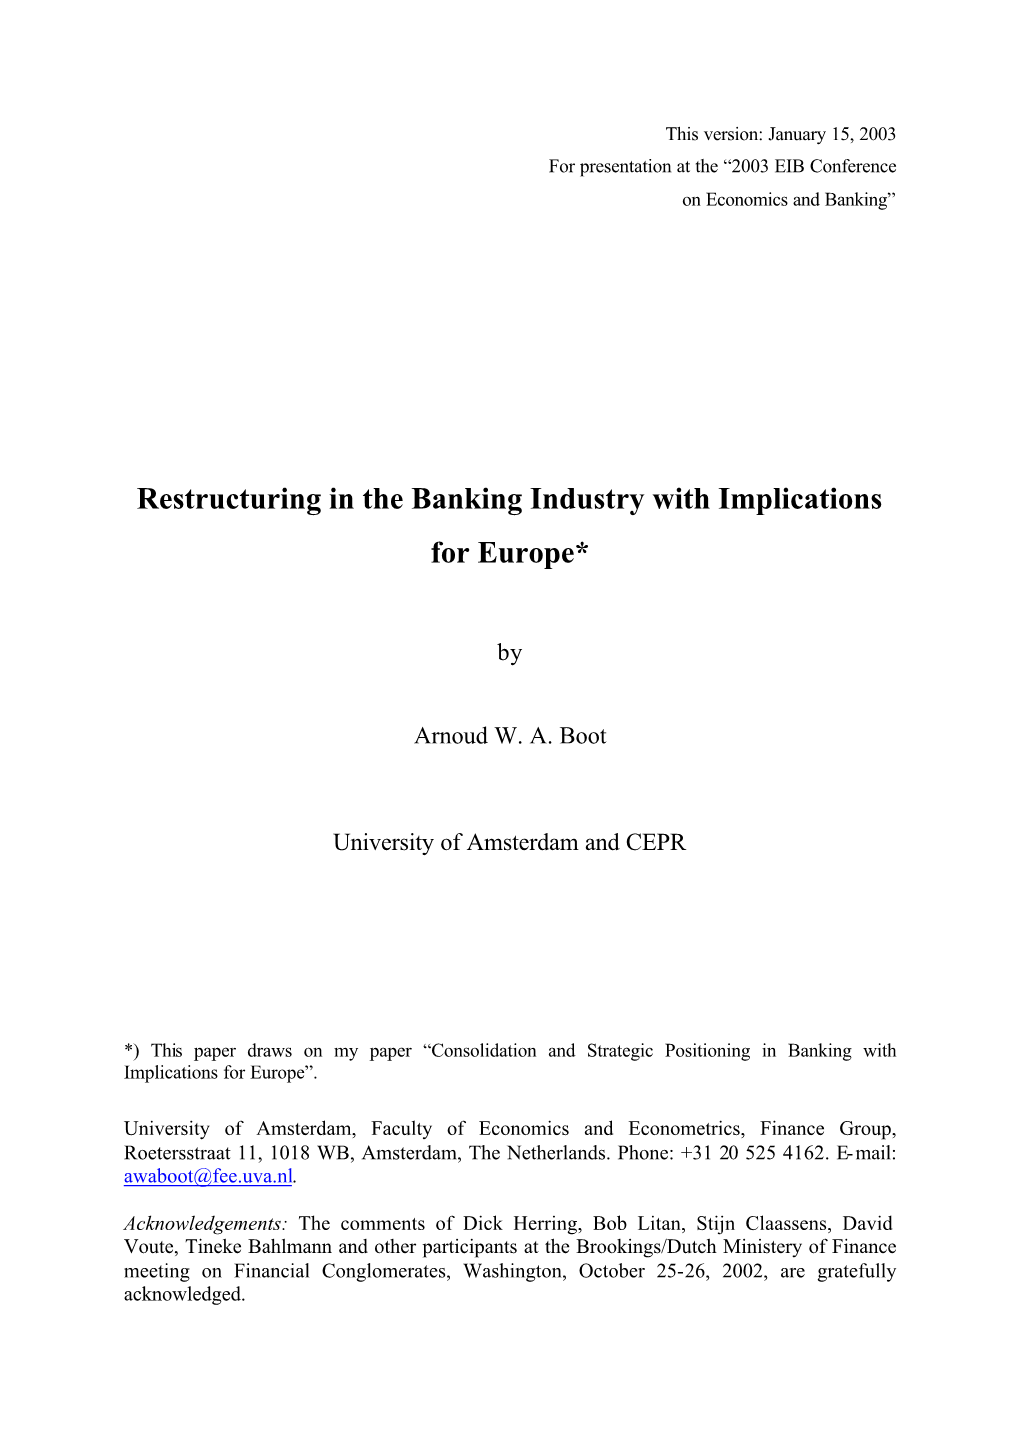 Restructuring of the Banking Industry-Europe-AWABOOT-Jan15…